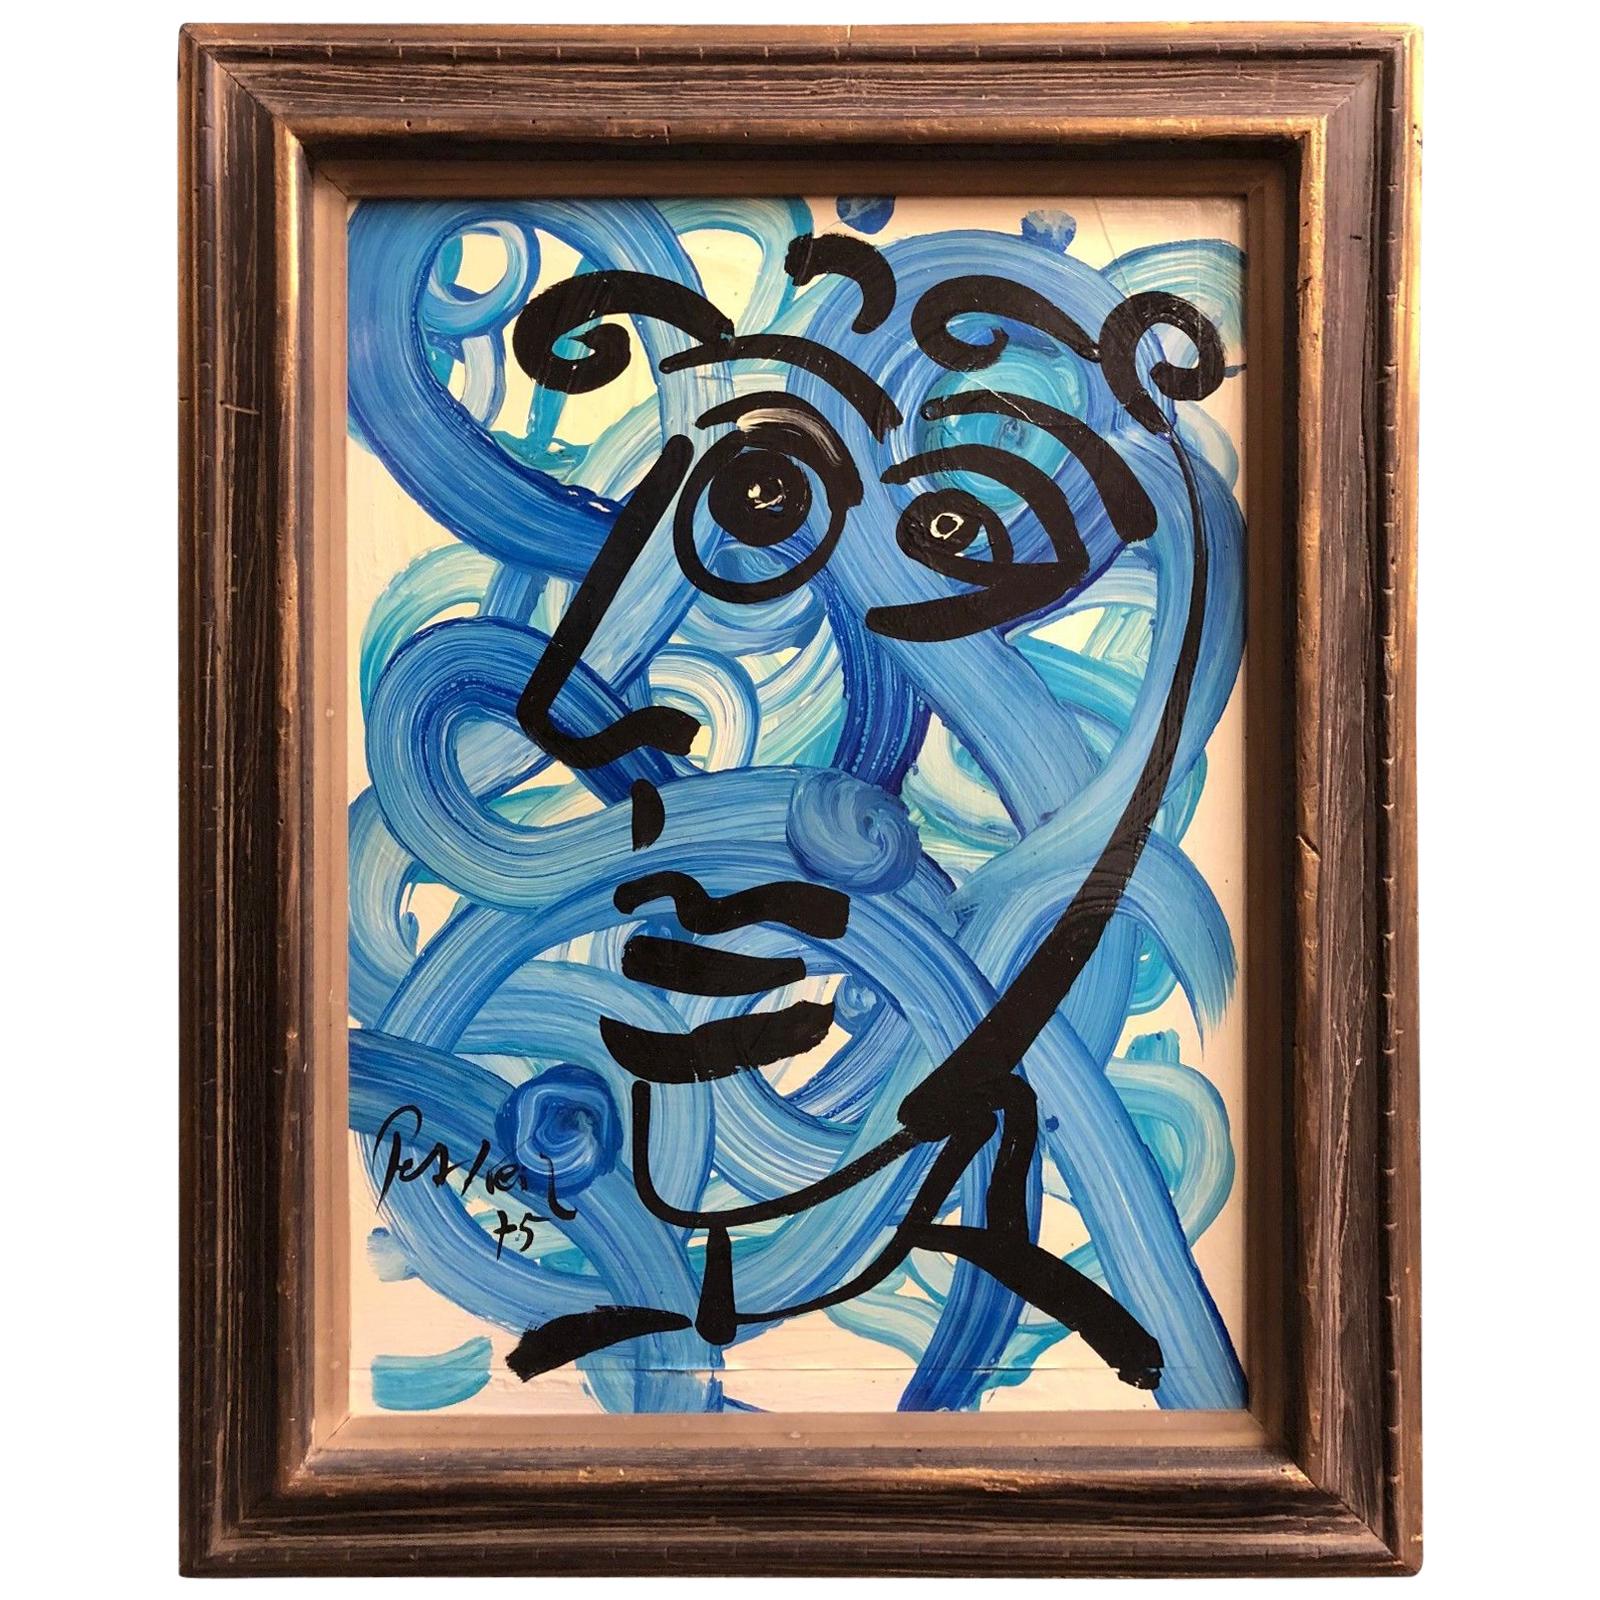 Peter Keil Abstract Expressionist Portrait Oil Painting "The Blue Matador"